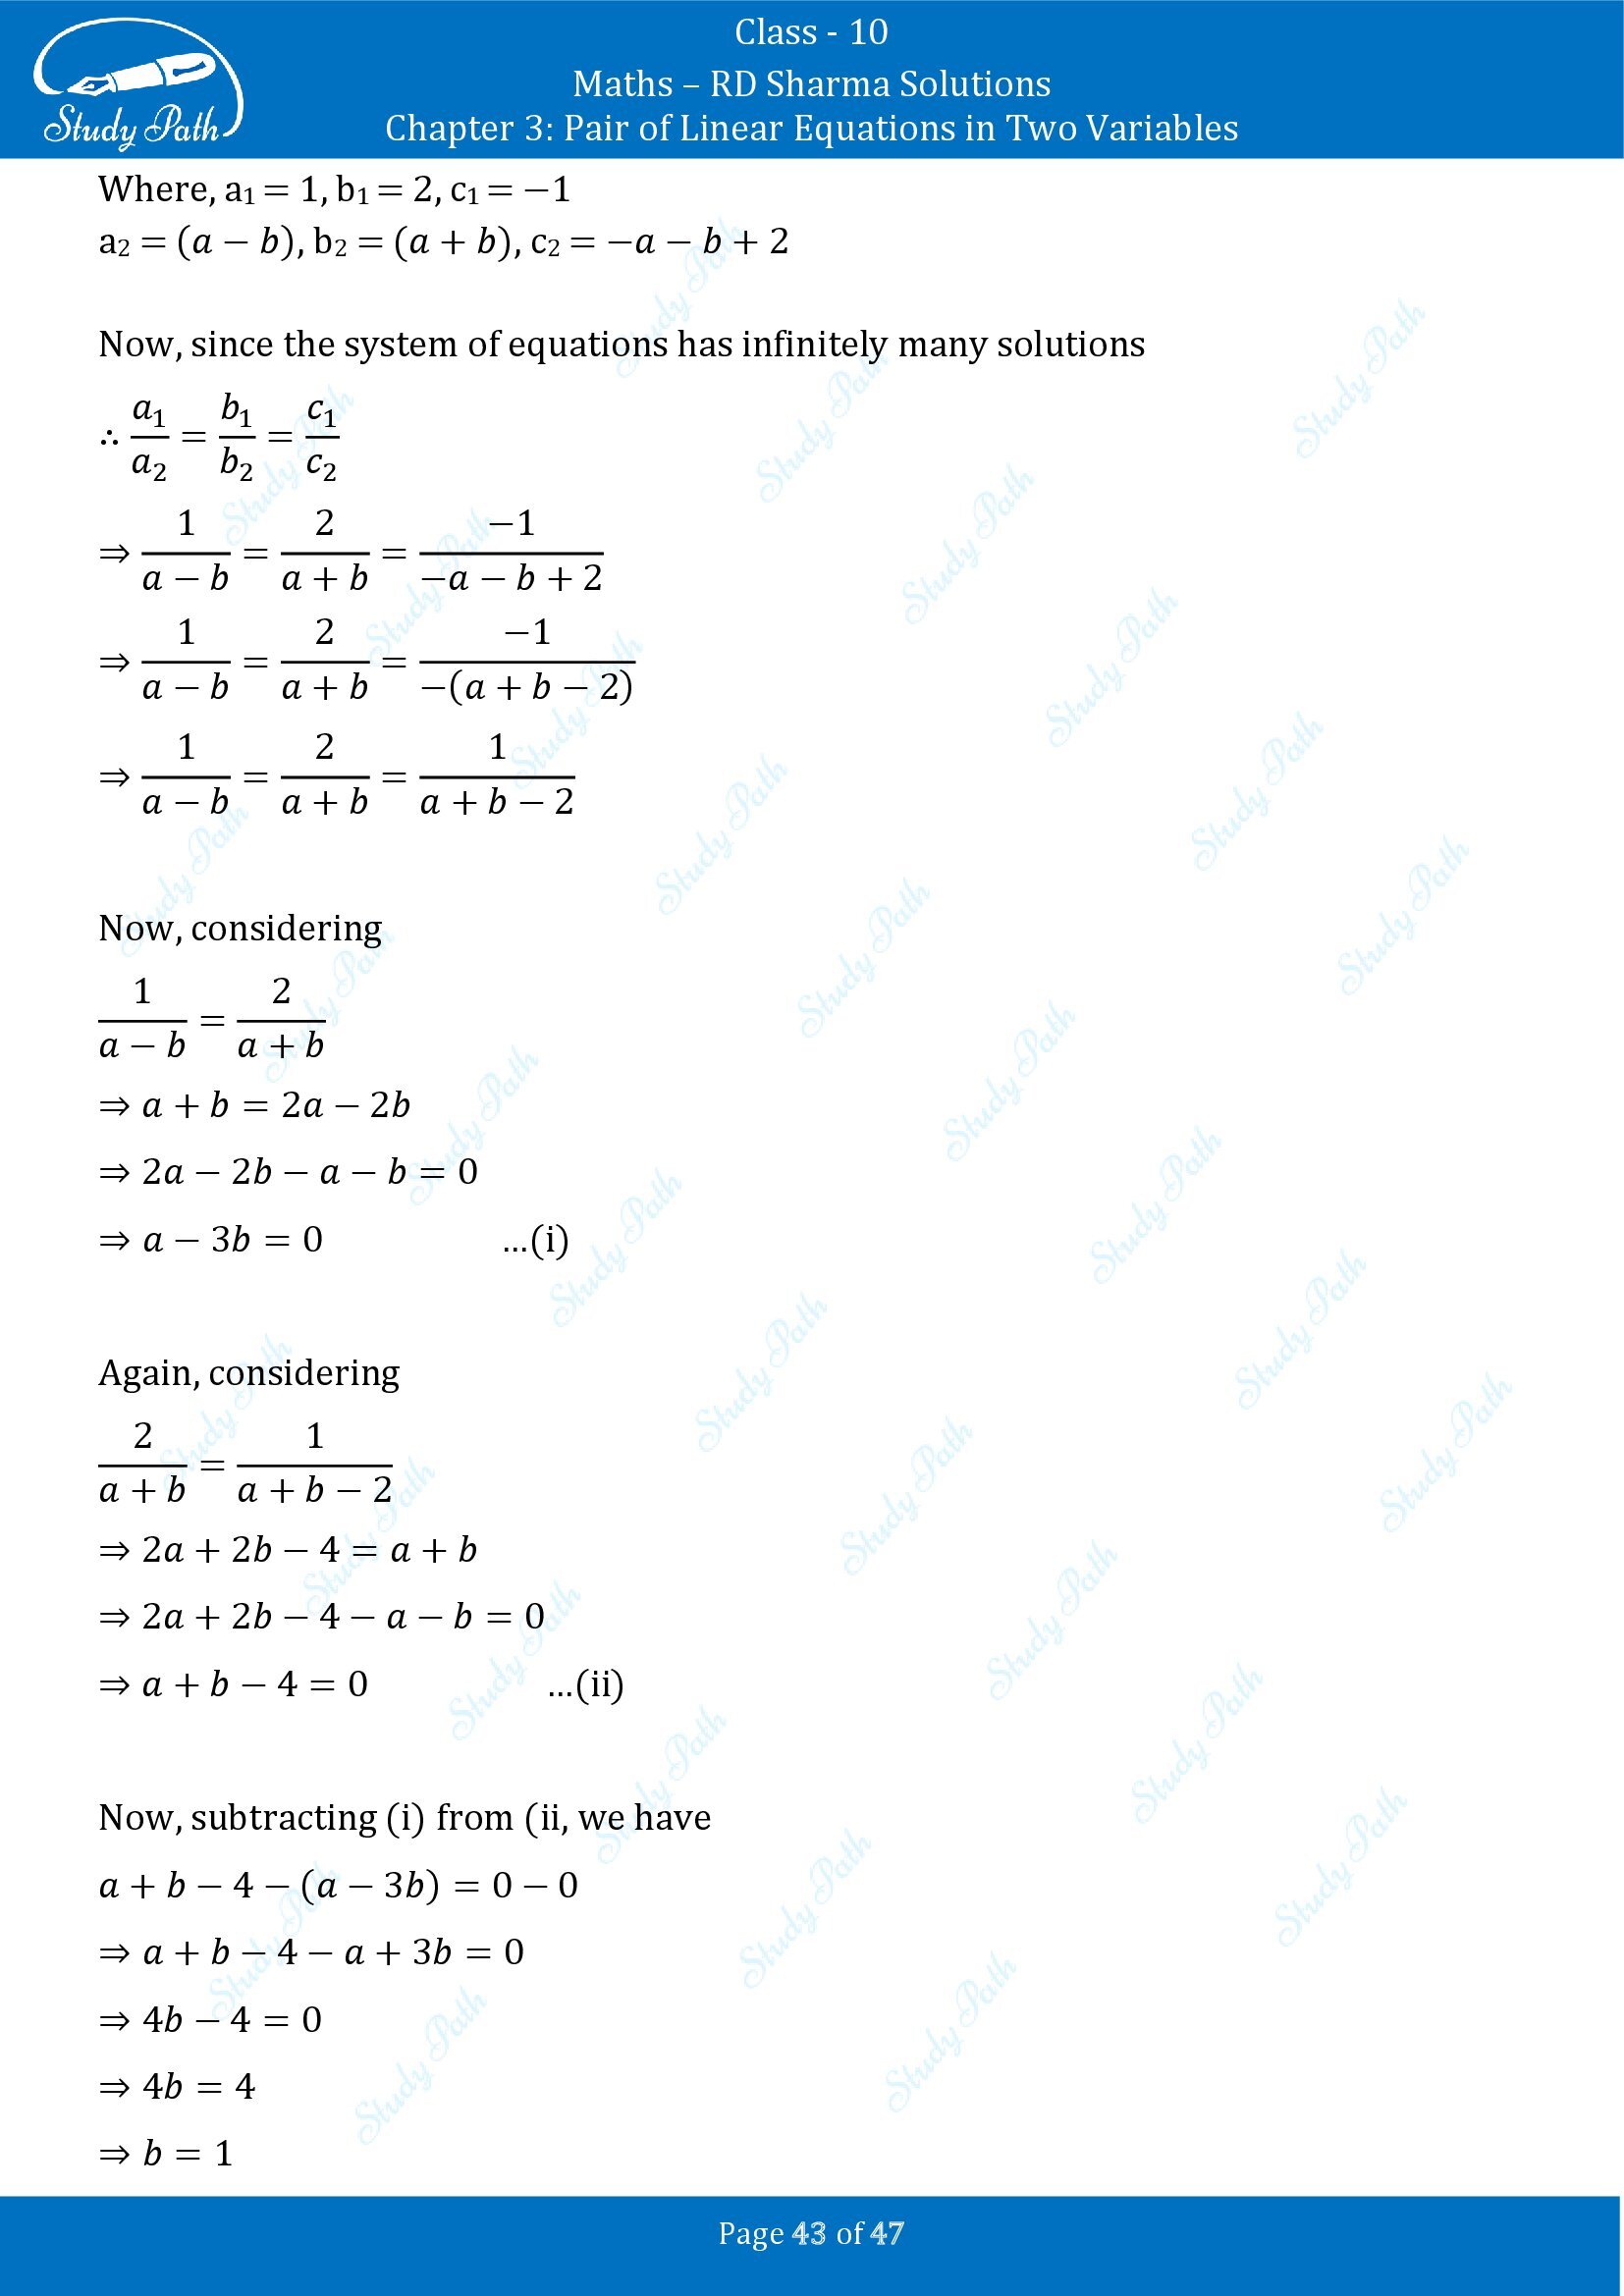 RD Sharma Solutions Class 10 Chapter 3 Pair of Linear Equations in Two Variables Exercise 3.5 00043